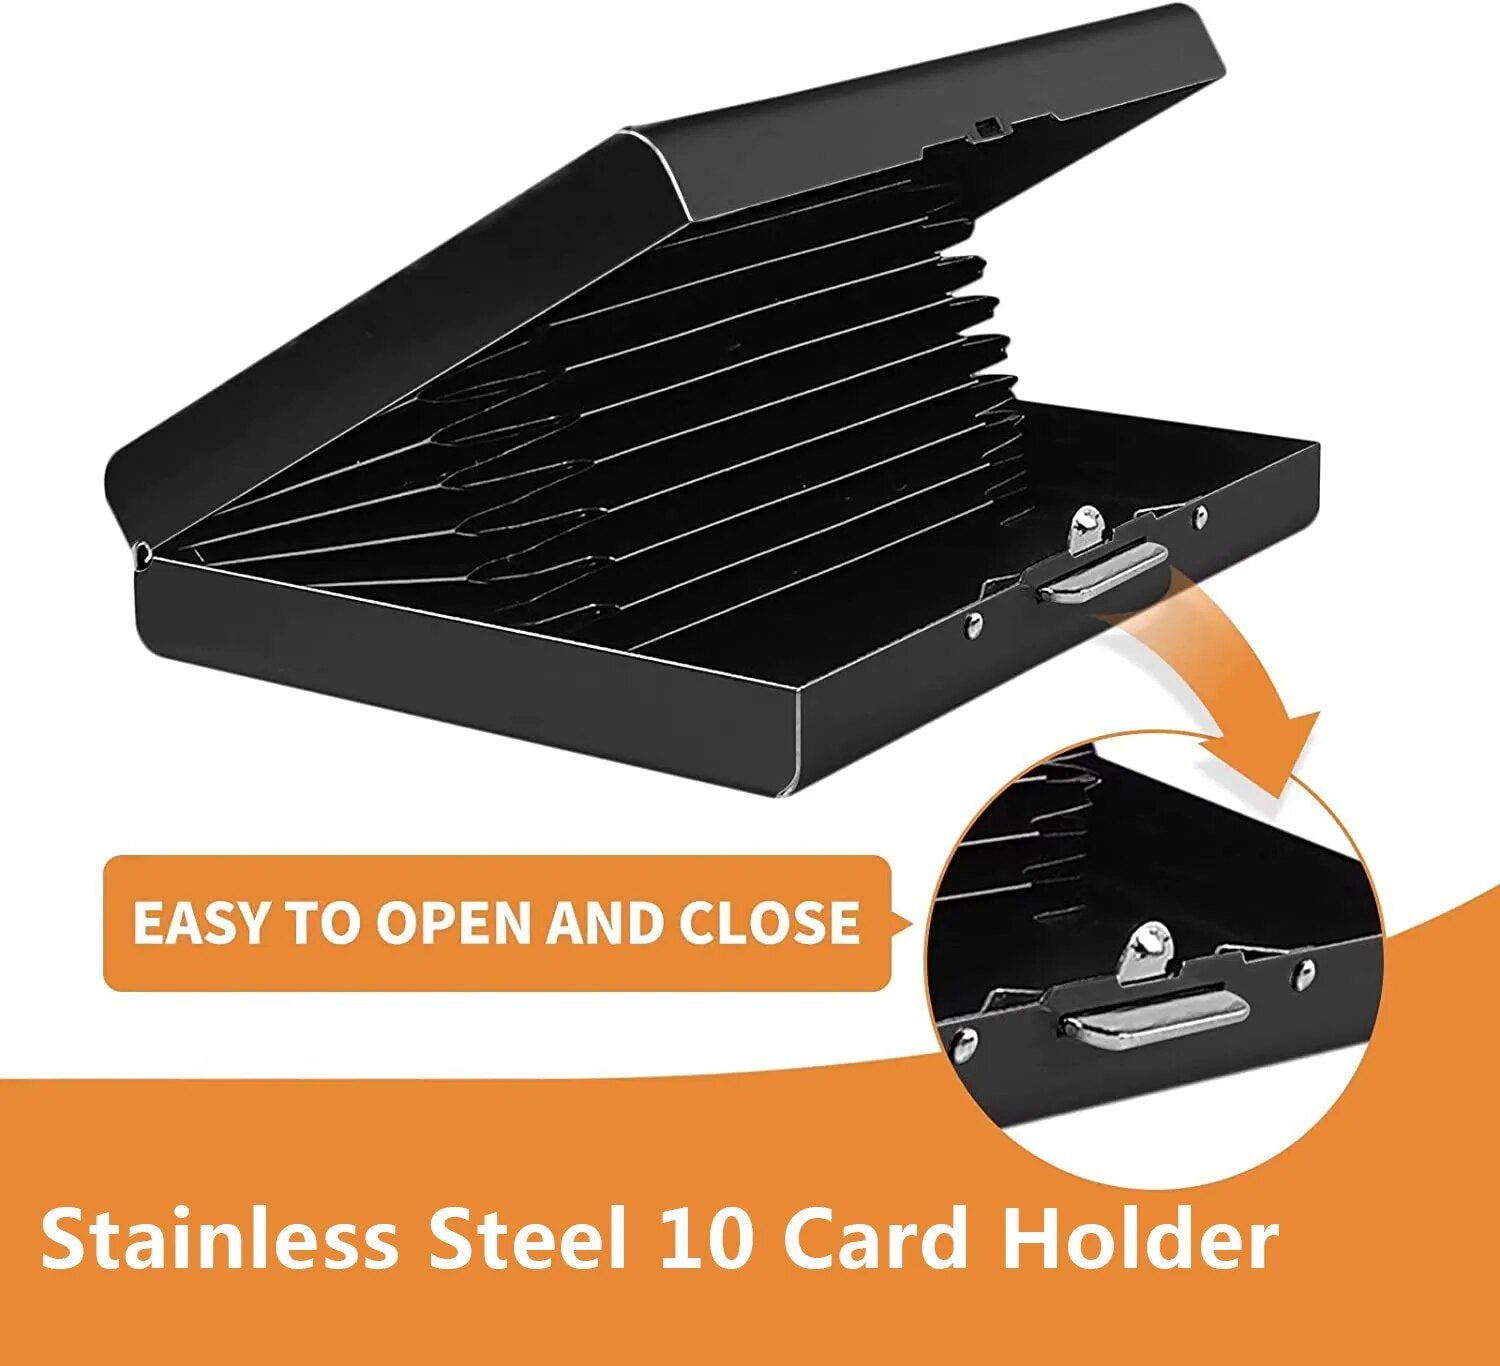 A side view of the card organizer emphasizes its slim profile and easy-to-open mechanism with cards partially visible, showcasing the practical design.